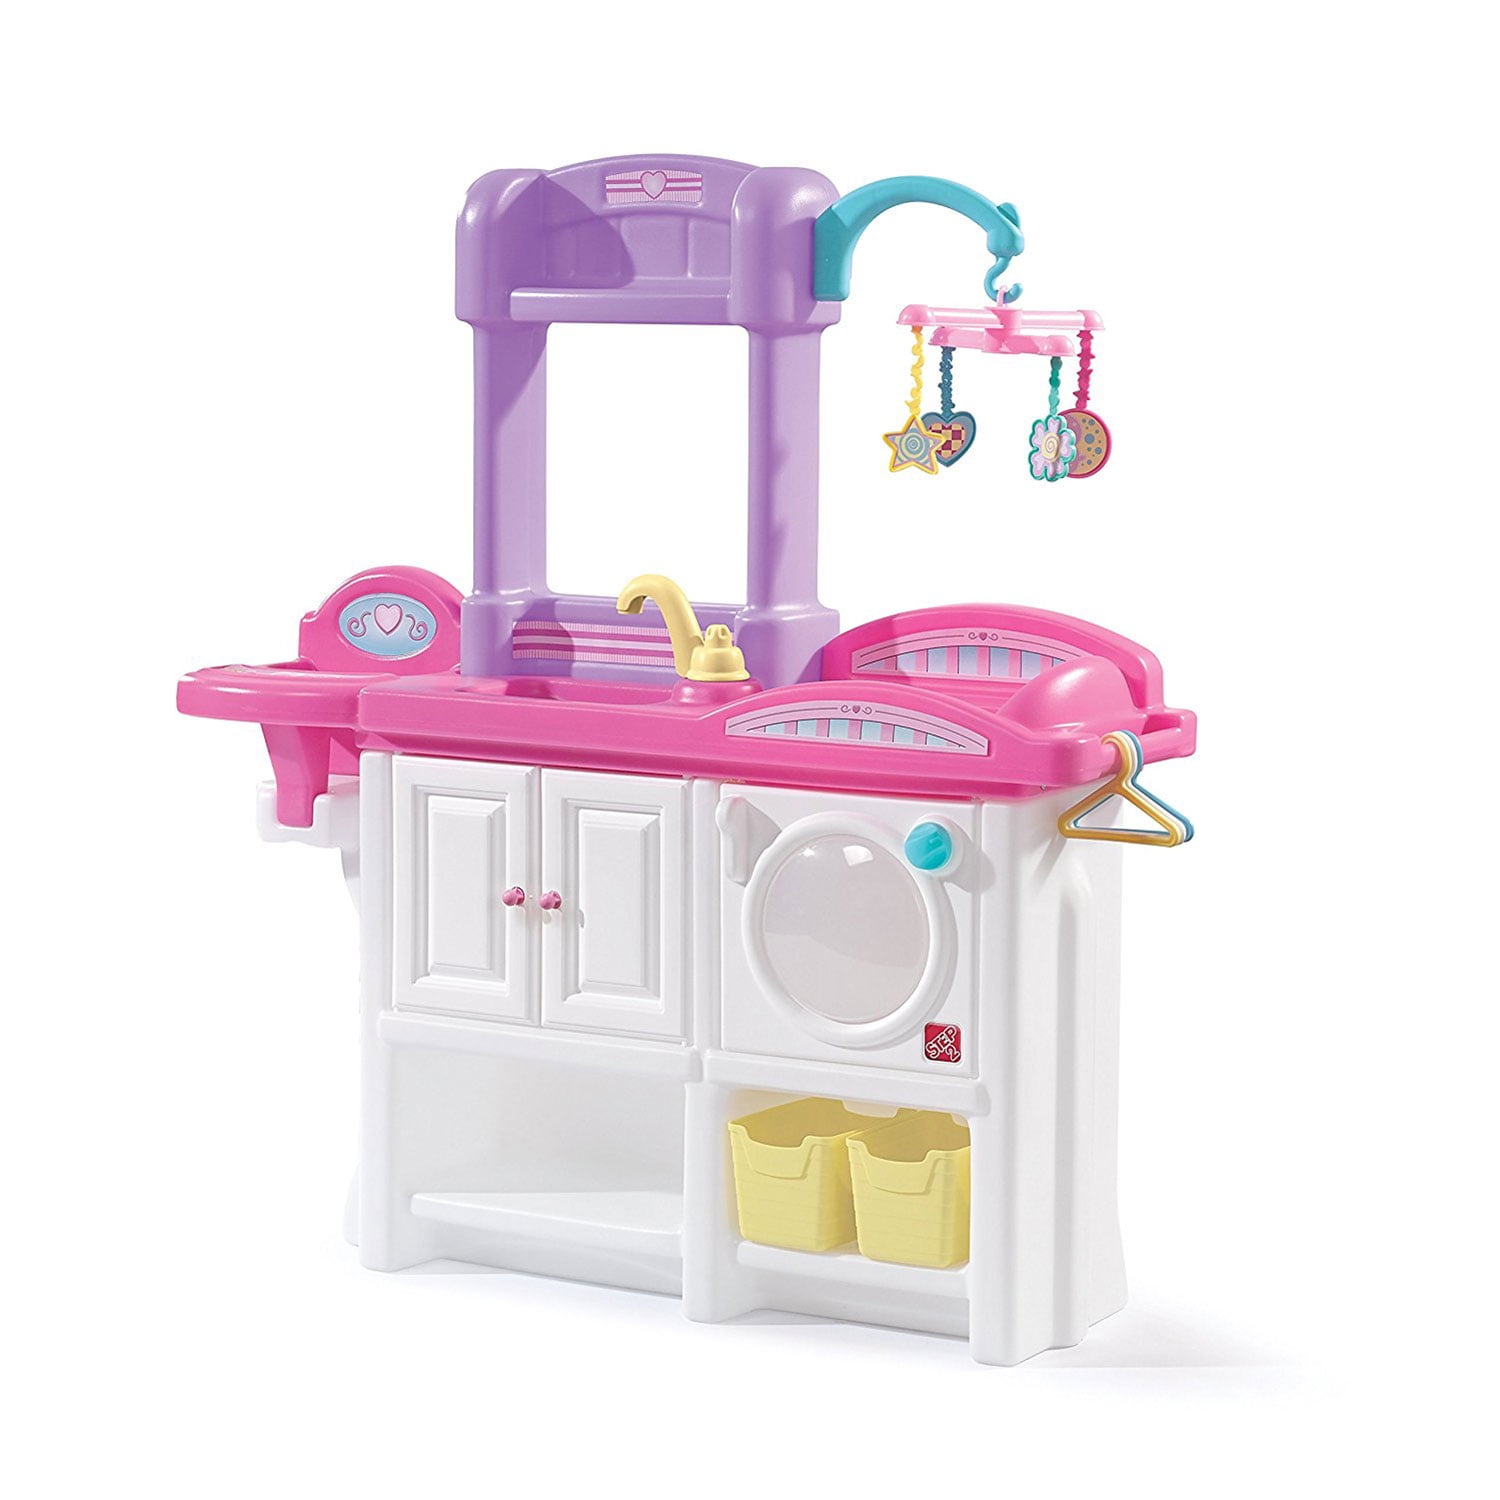 Step2 Love And Care Deluxe Nursery Playset Feeding Station Children Kids New